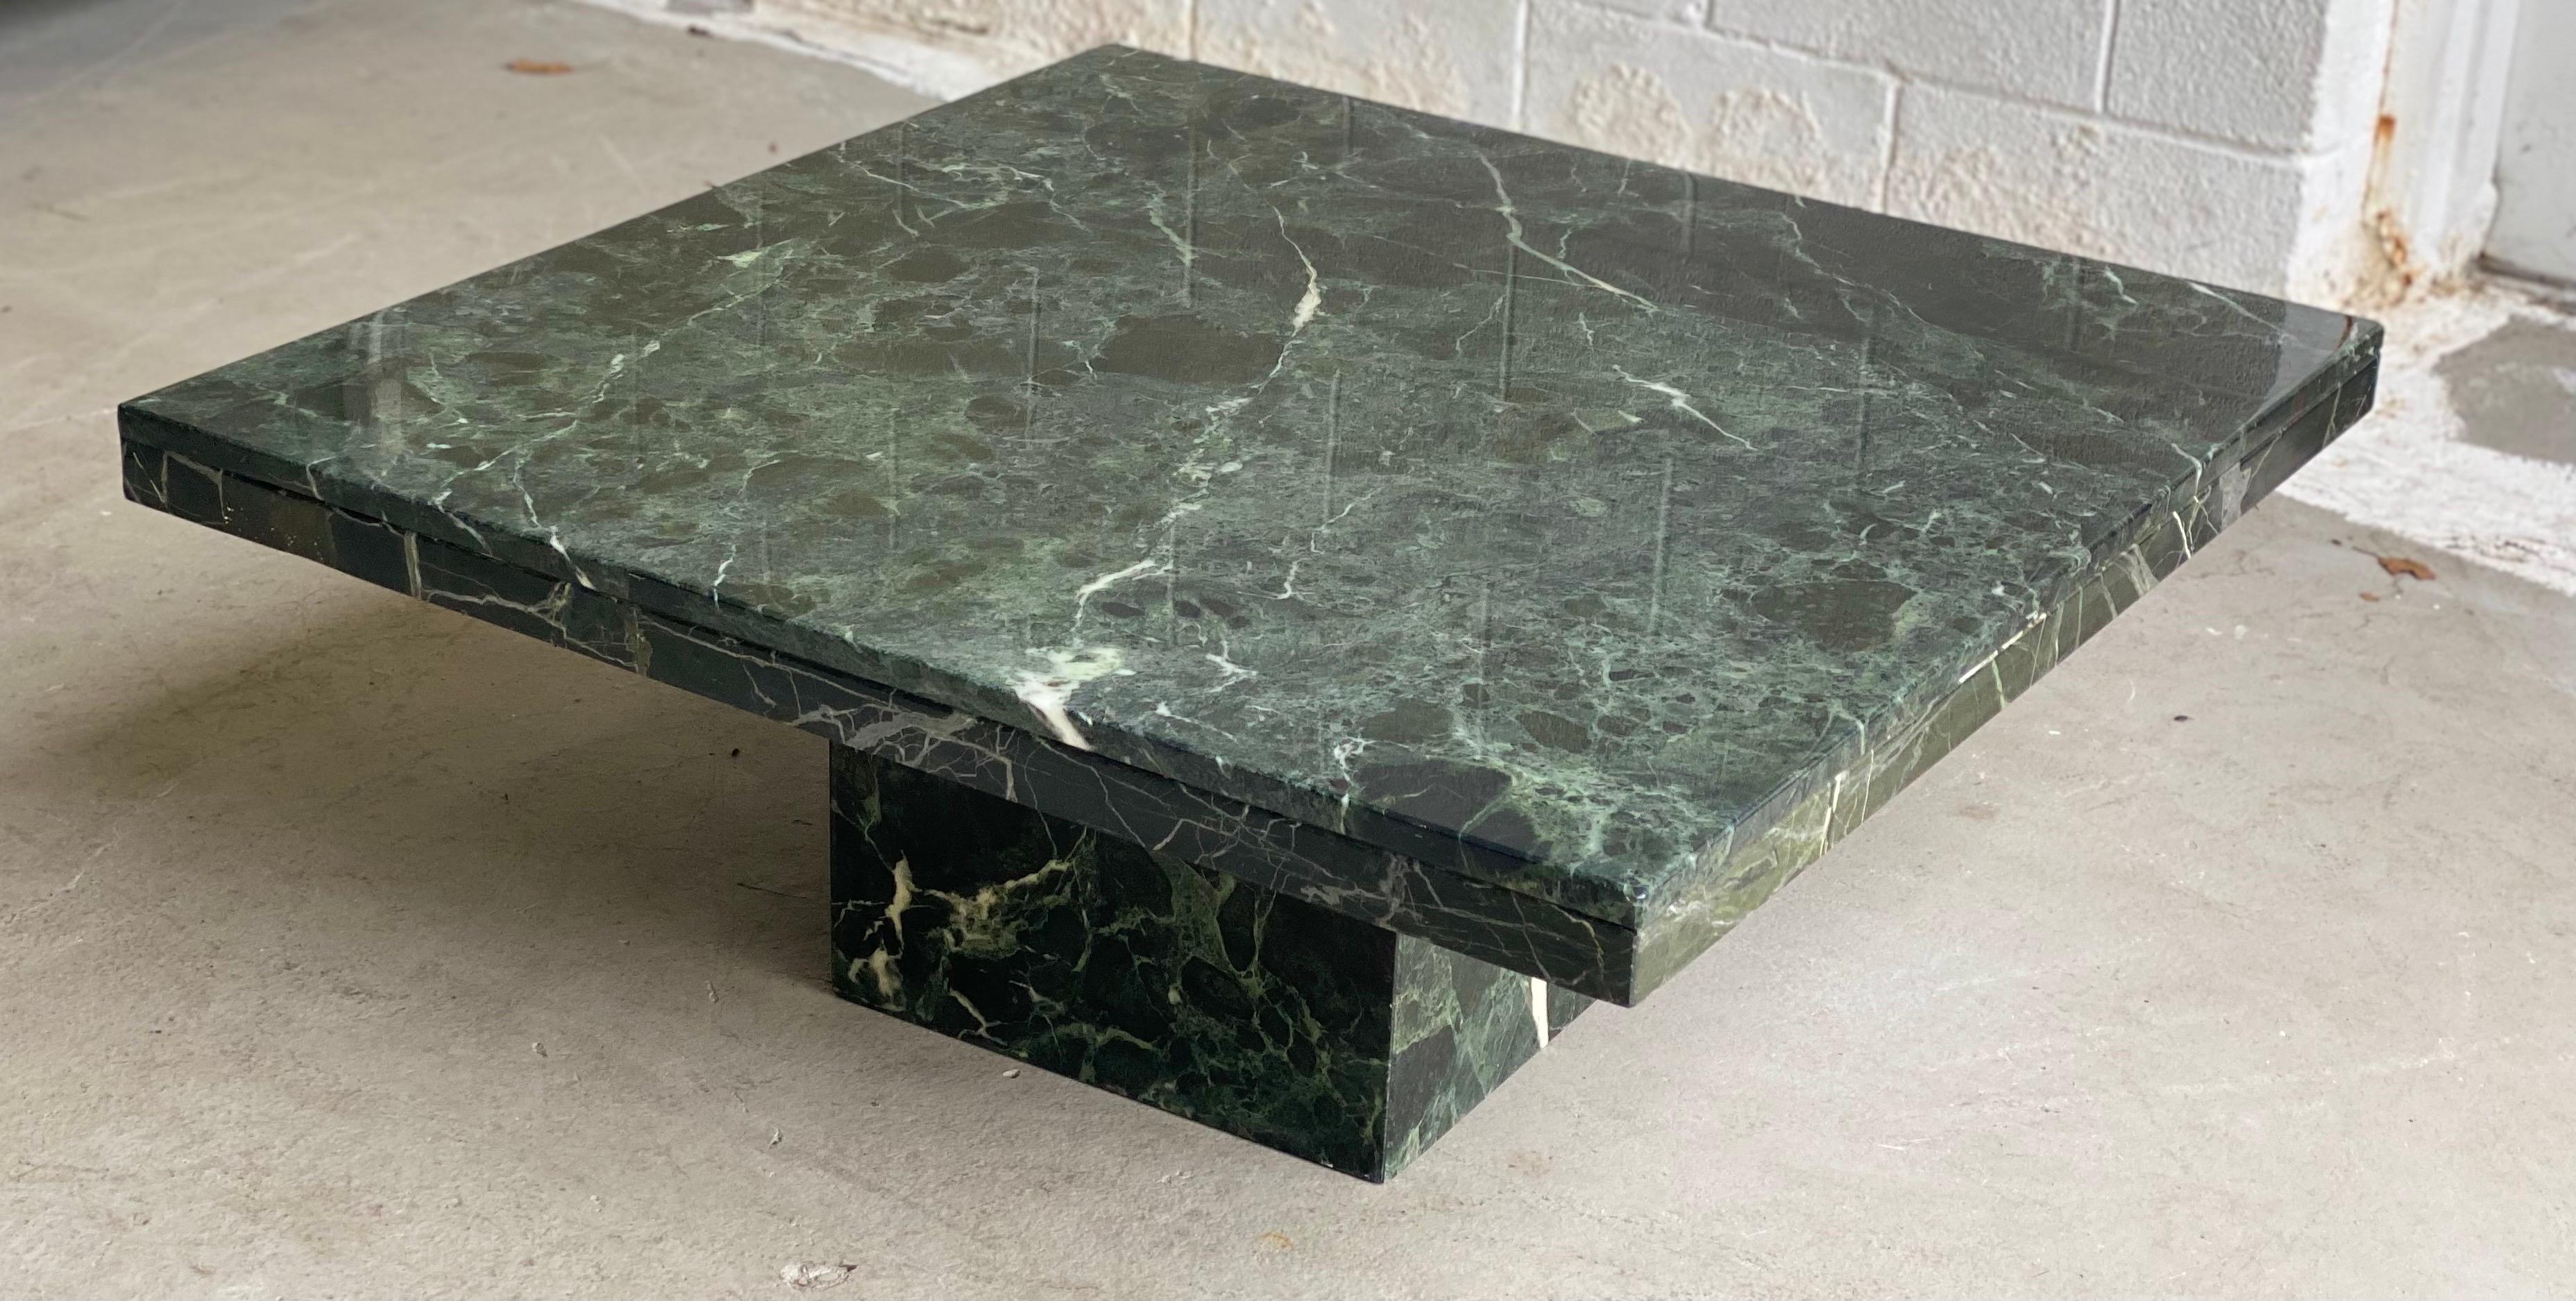 We are very pleased to offer a classic, monolithic stone coffee table, made in Italy, circa the 1970s. Made of a dark green marble with a laquear finish, this table is ideal to introduce a touch of color and character to a room. This architectural